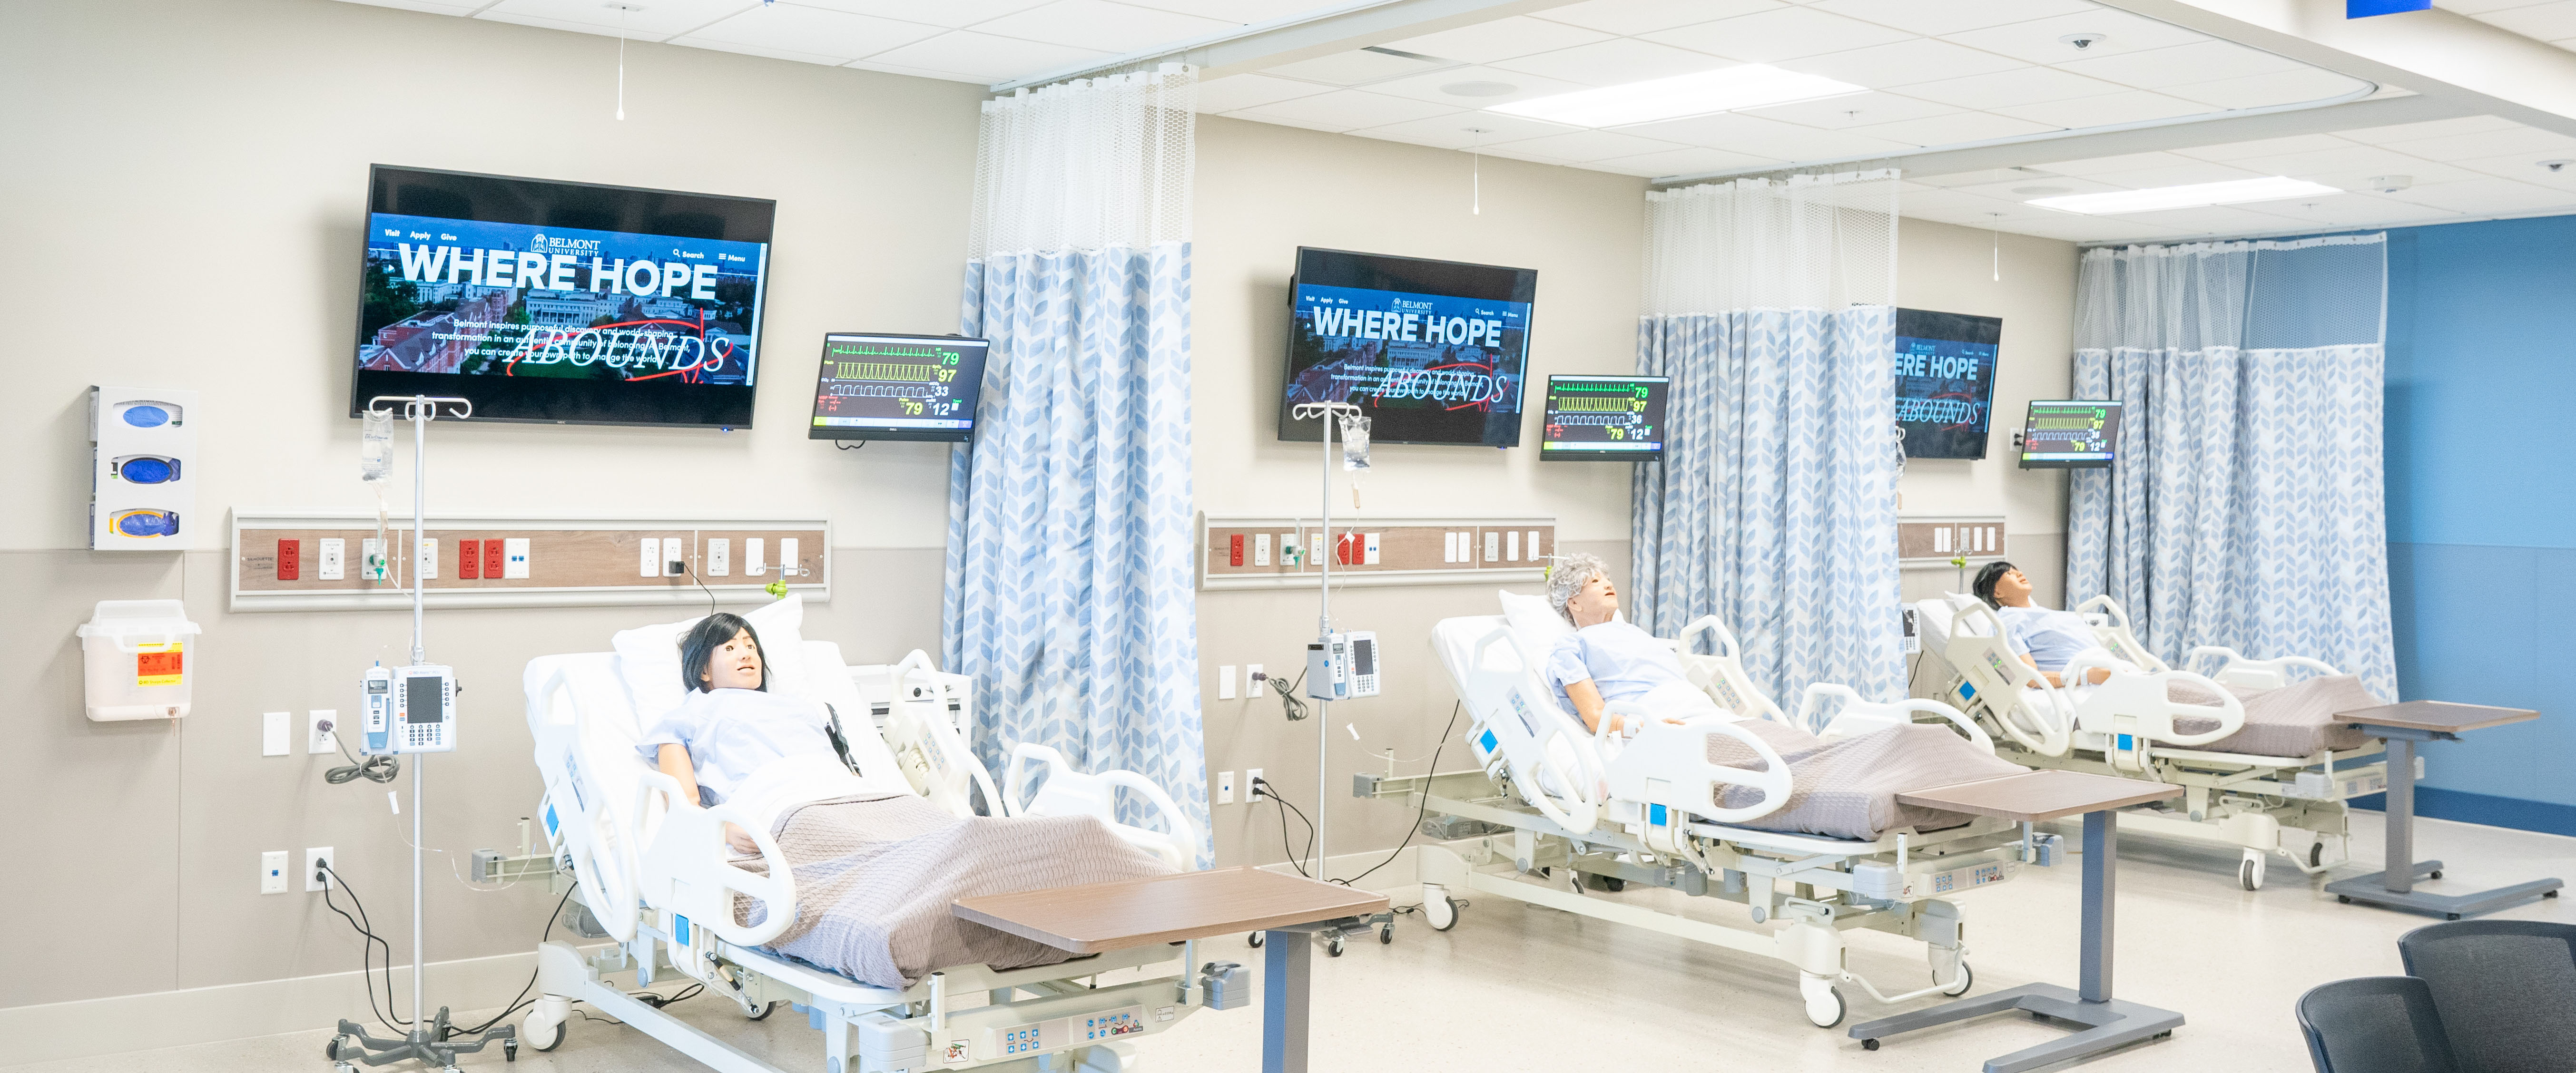 Simulation lab filled with hospital beds and medical dummies for students to practice on